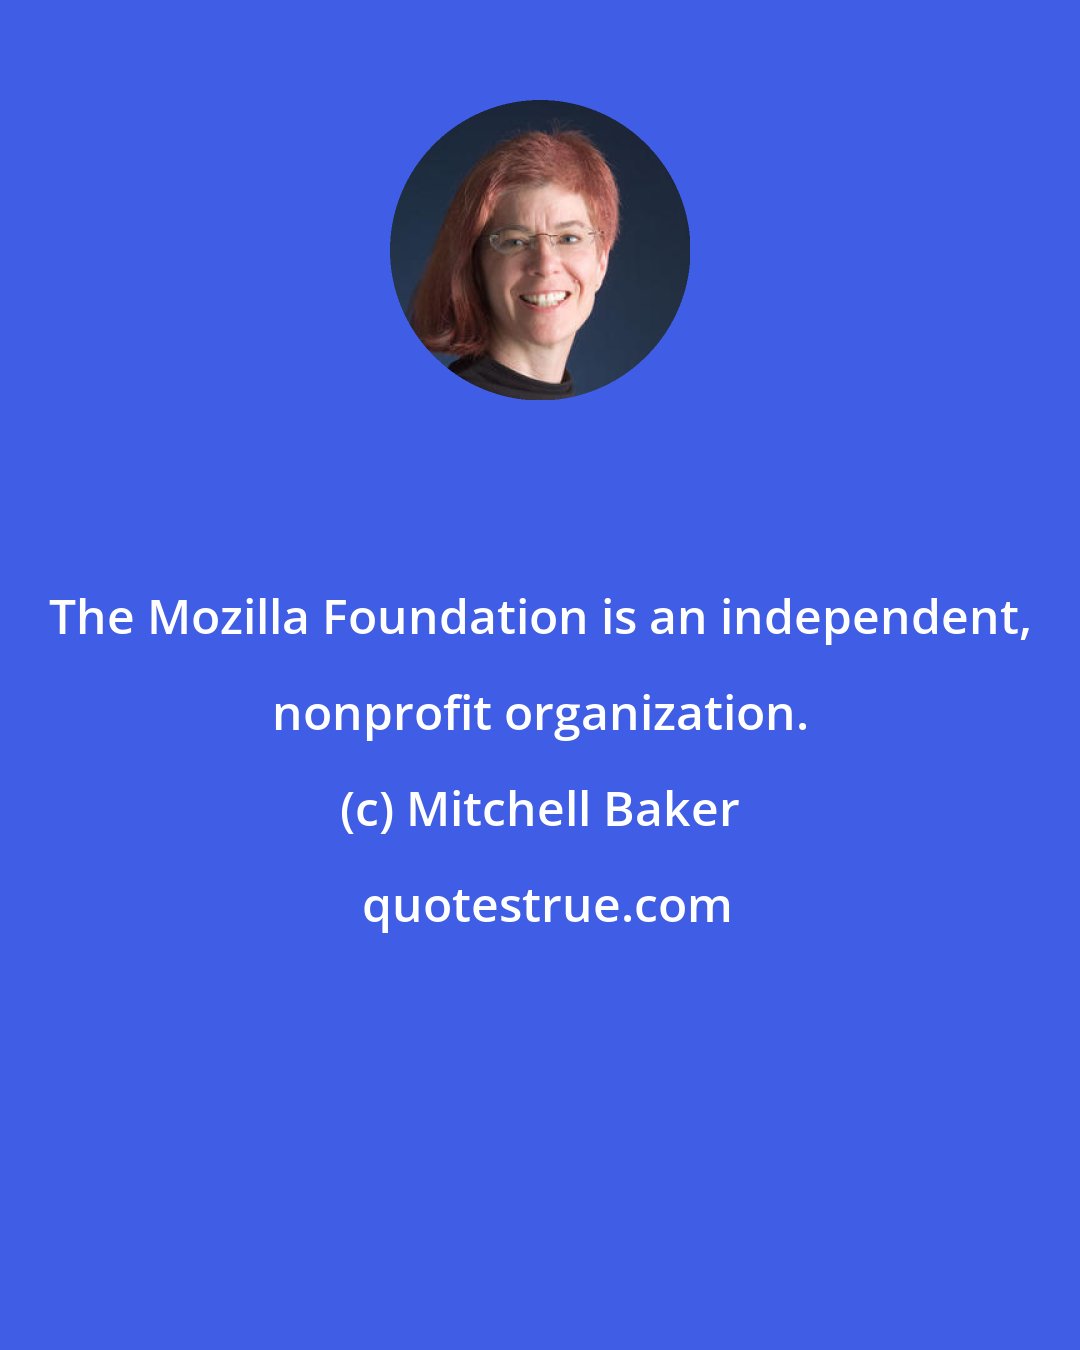 Mitchell Baker: The Mozilla Foundation is an independent, nonprofit organization.